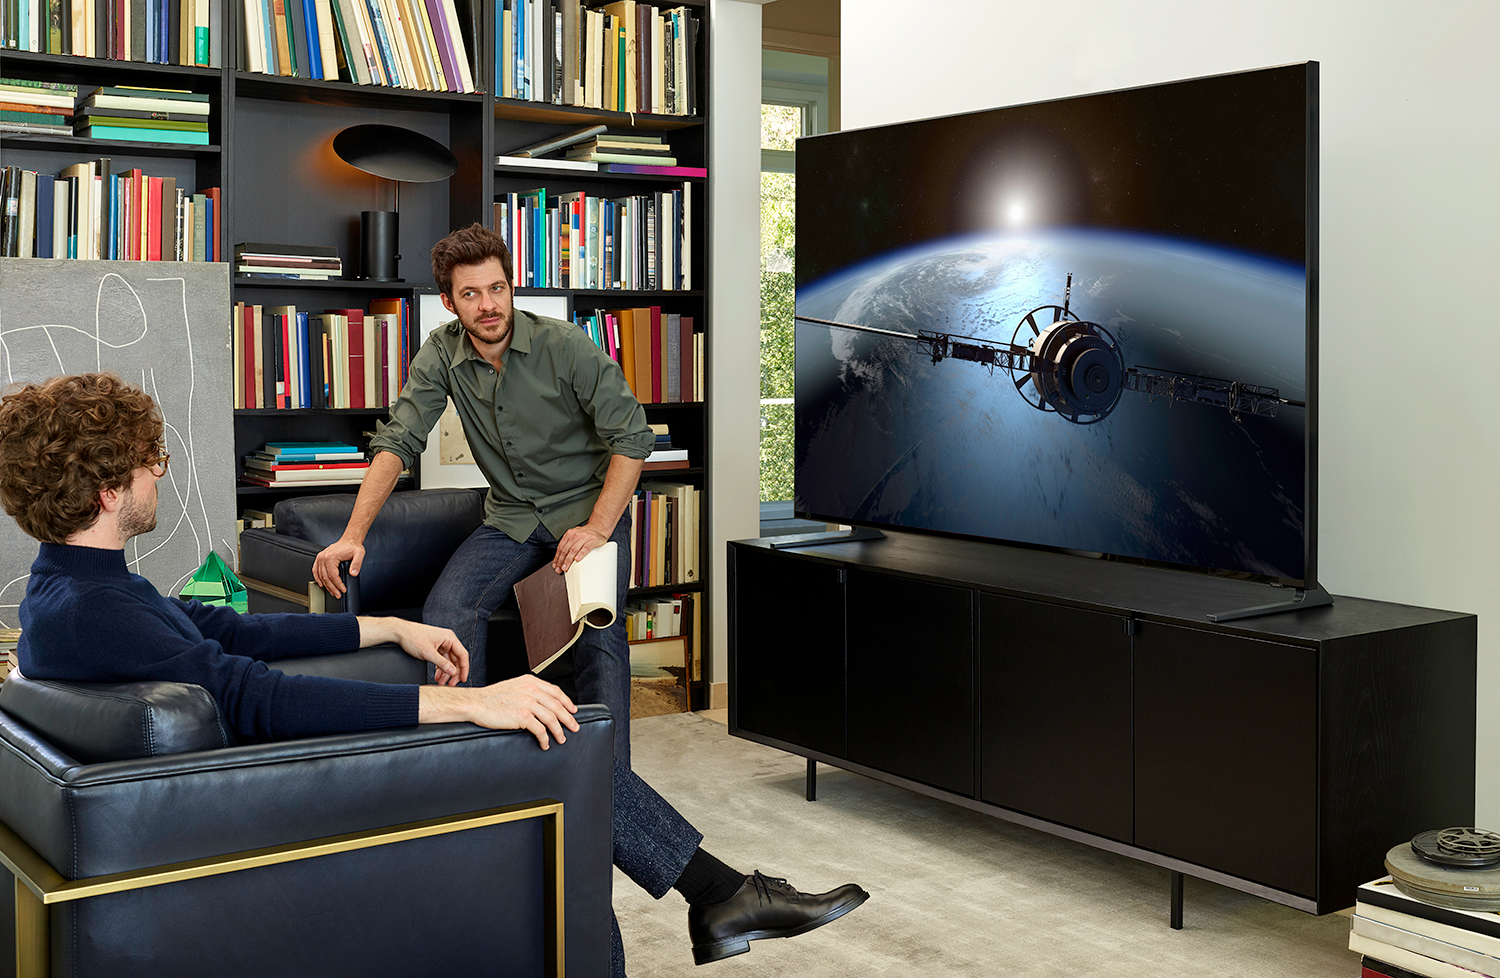 How To Watch TV Without Cable Or Satellite